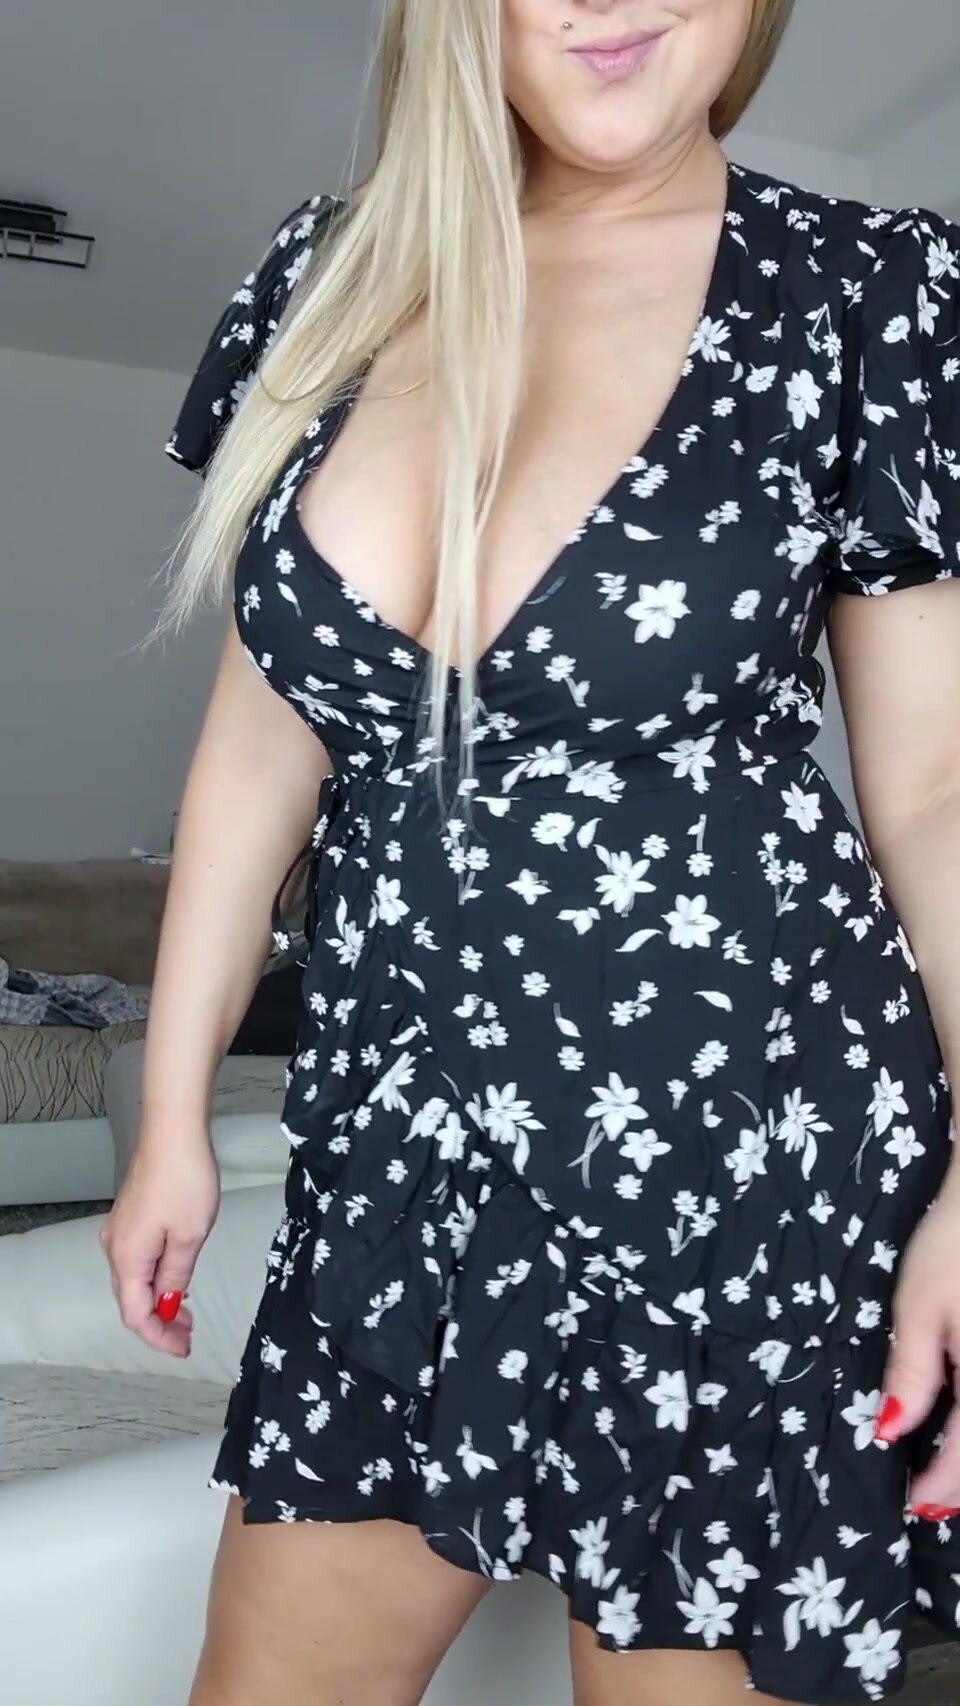 Want to experience a real thick goddess ?